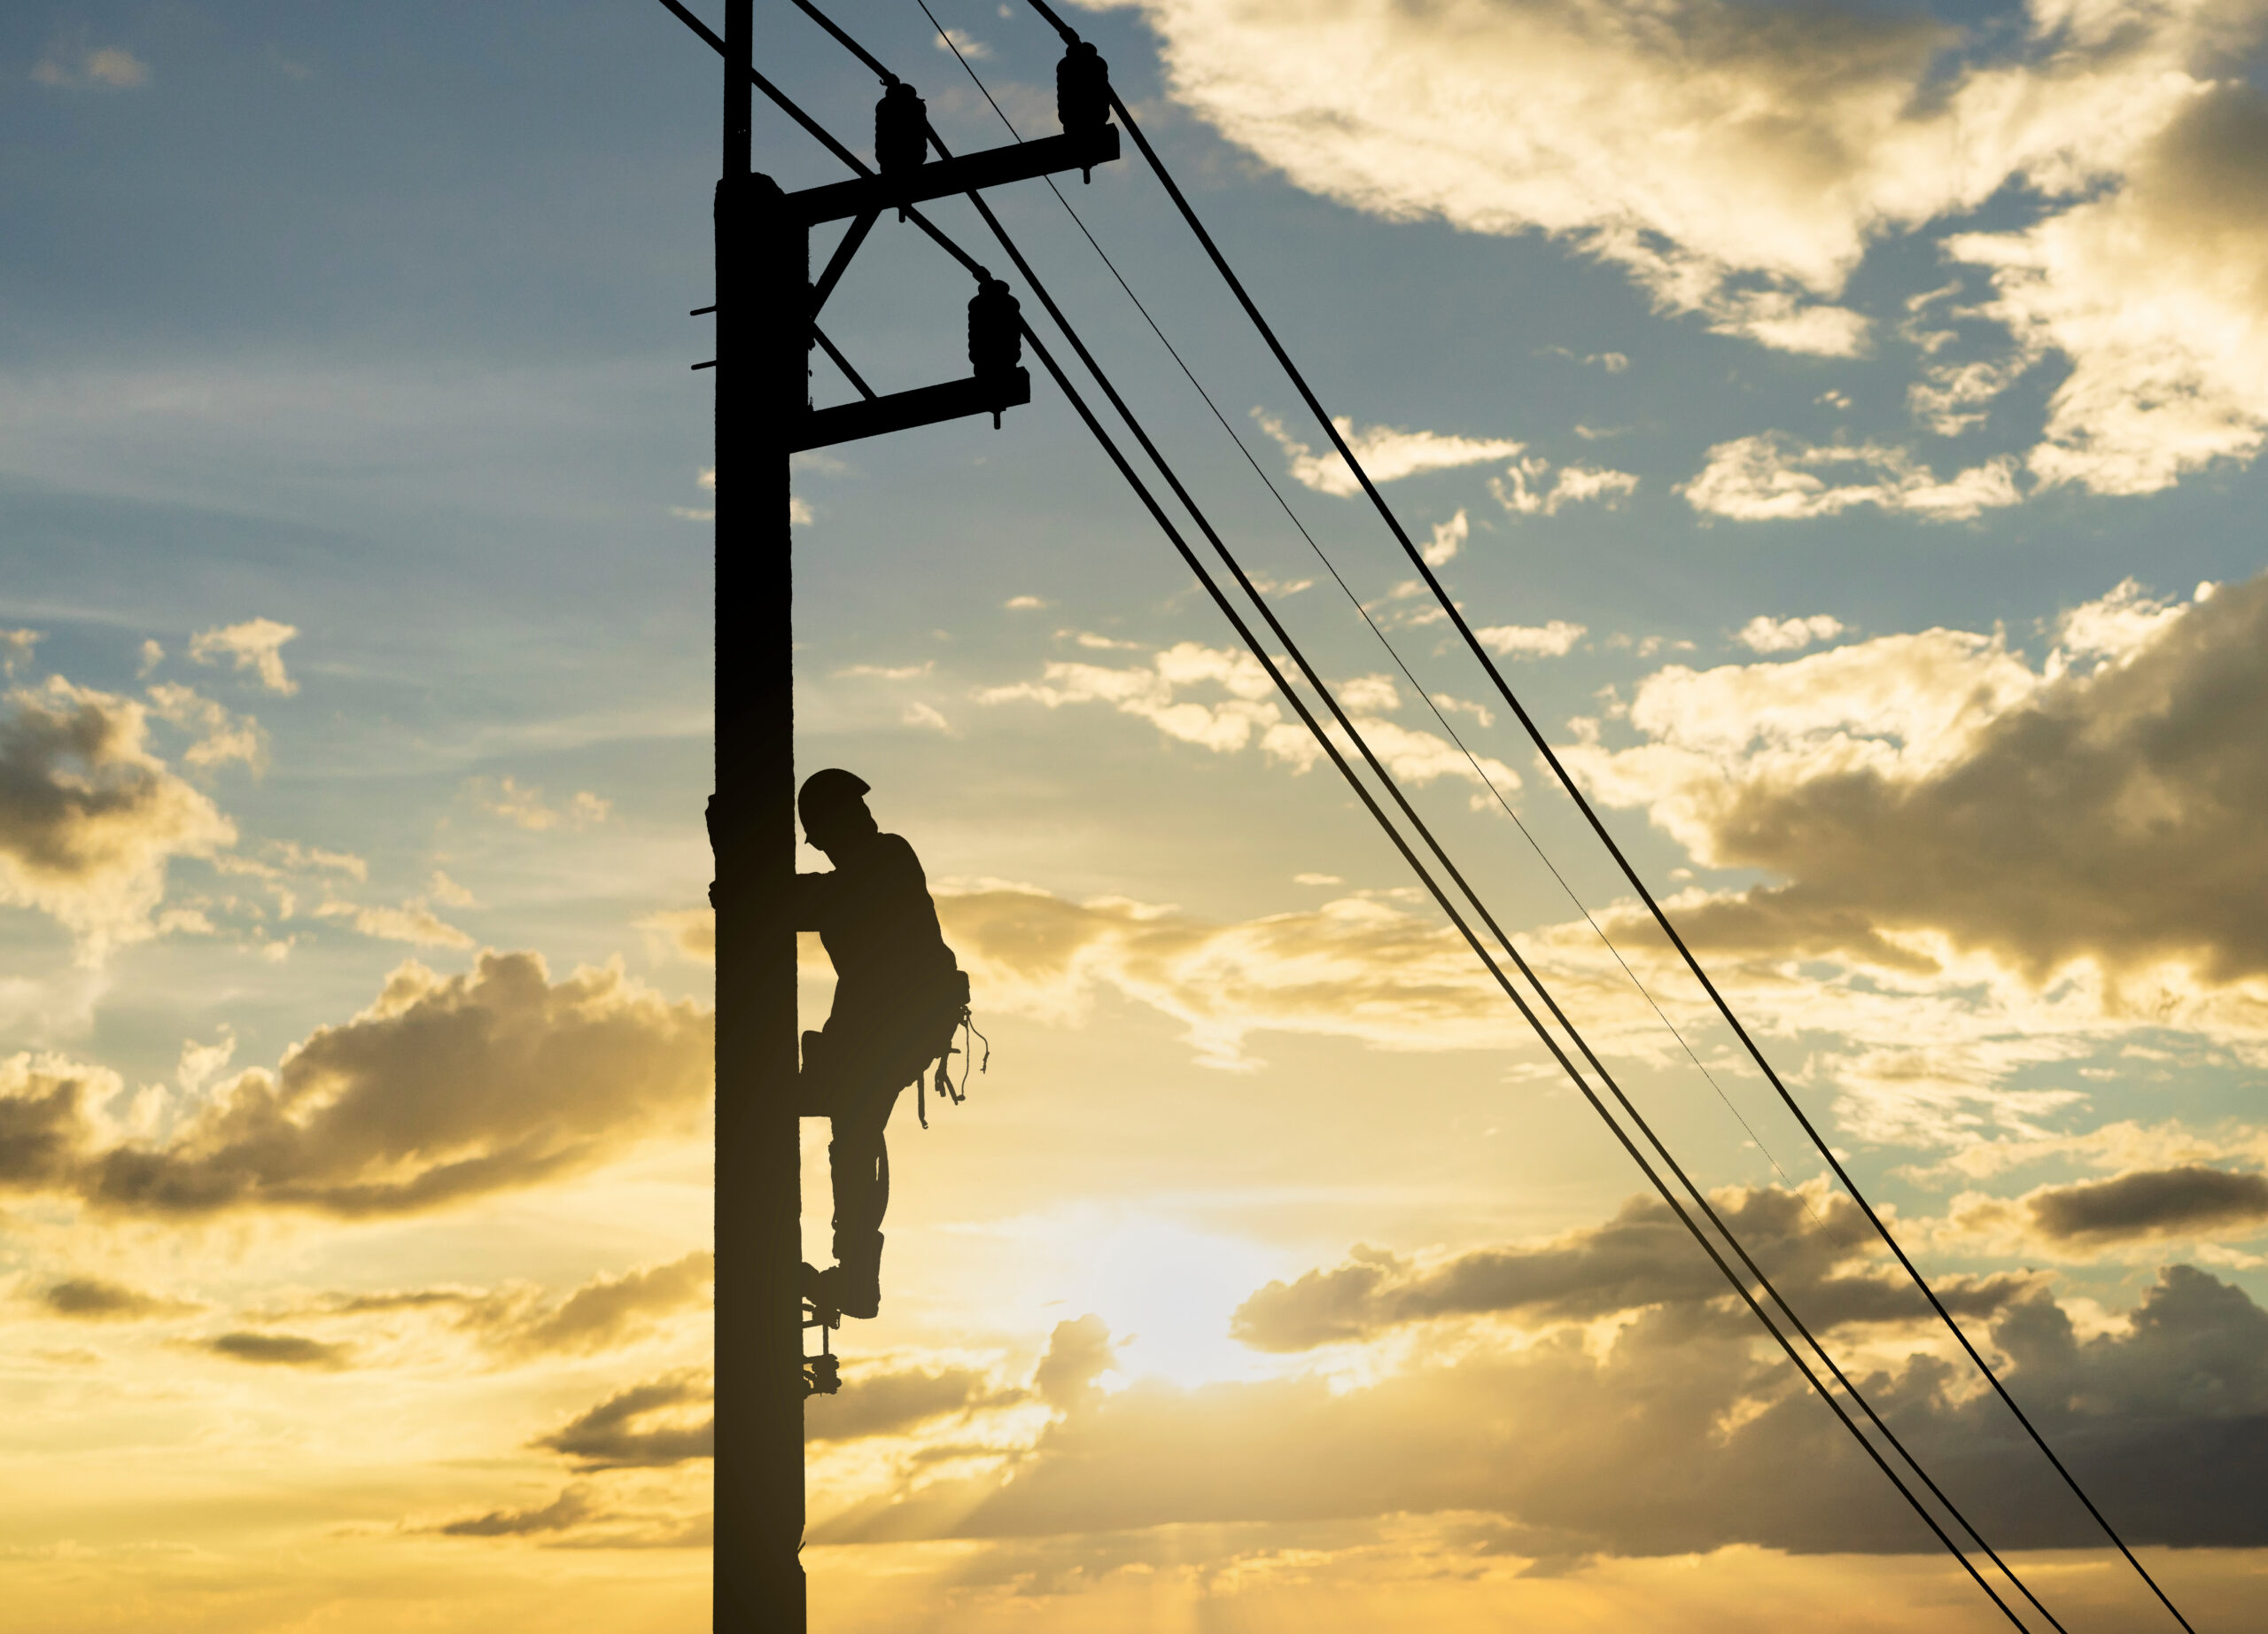 Silhouette man works with electricity on a pole with the sunset